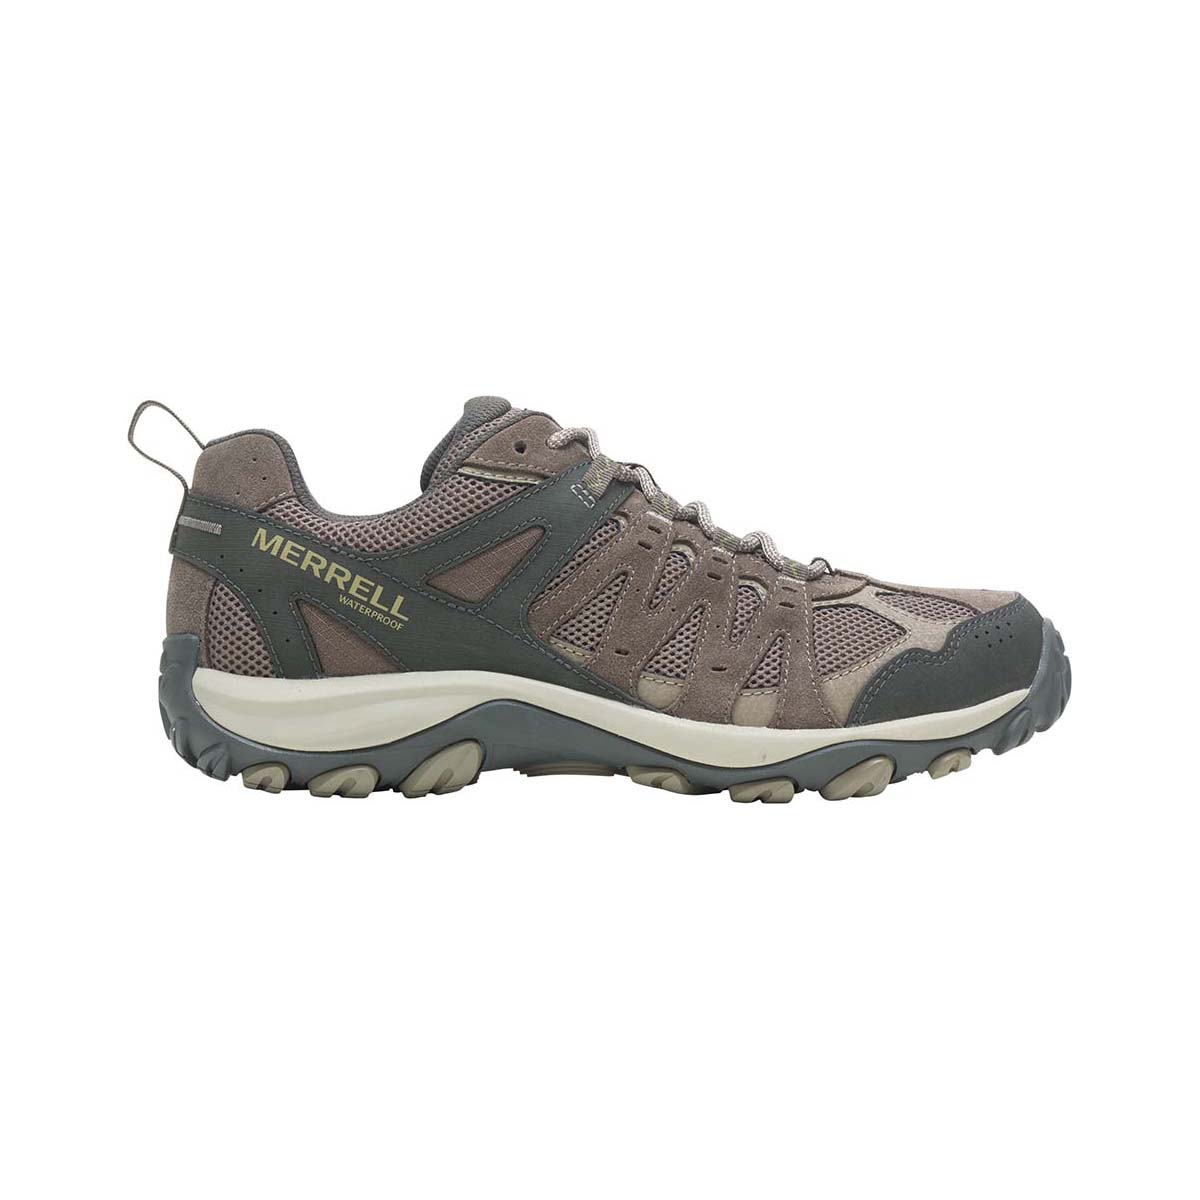 Merrell Accentor 3 Men's Low WP Hiking Boots Boulder 9